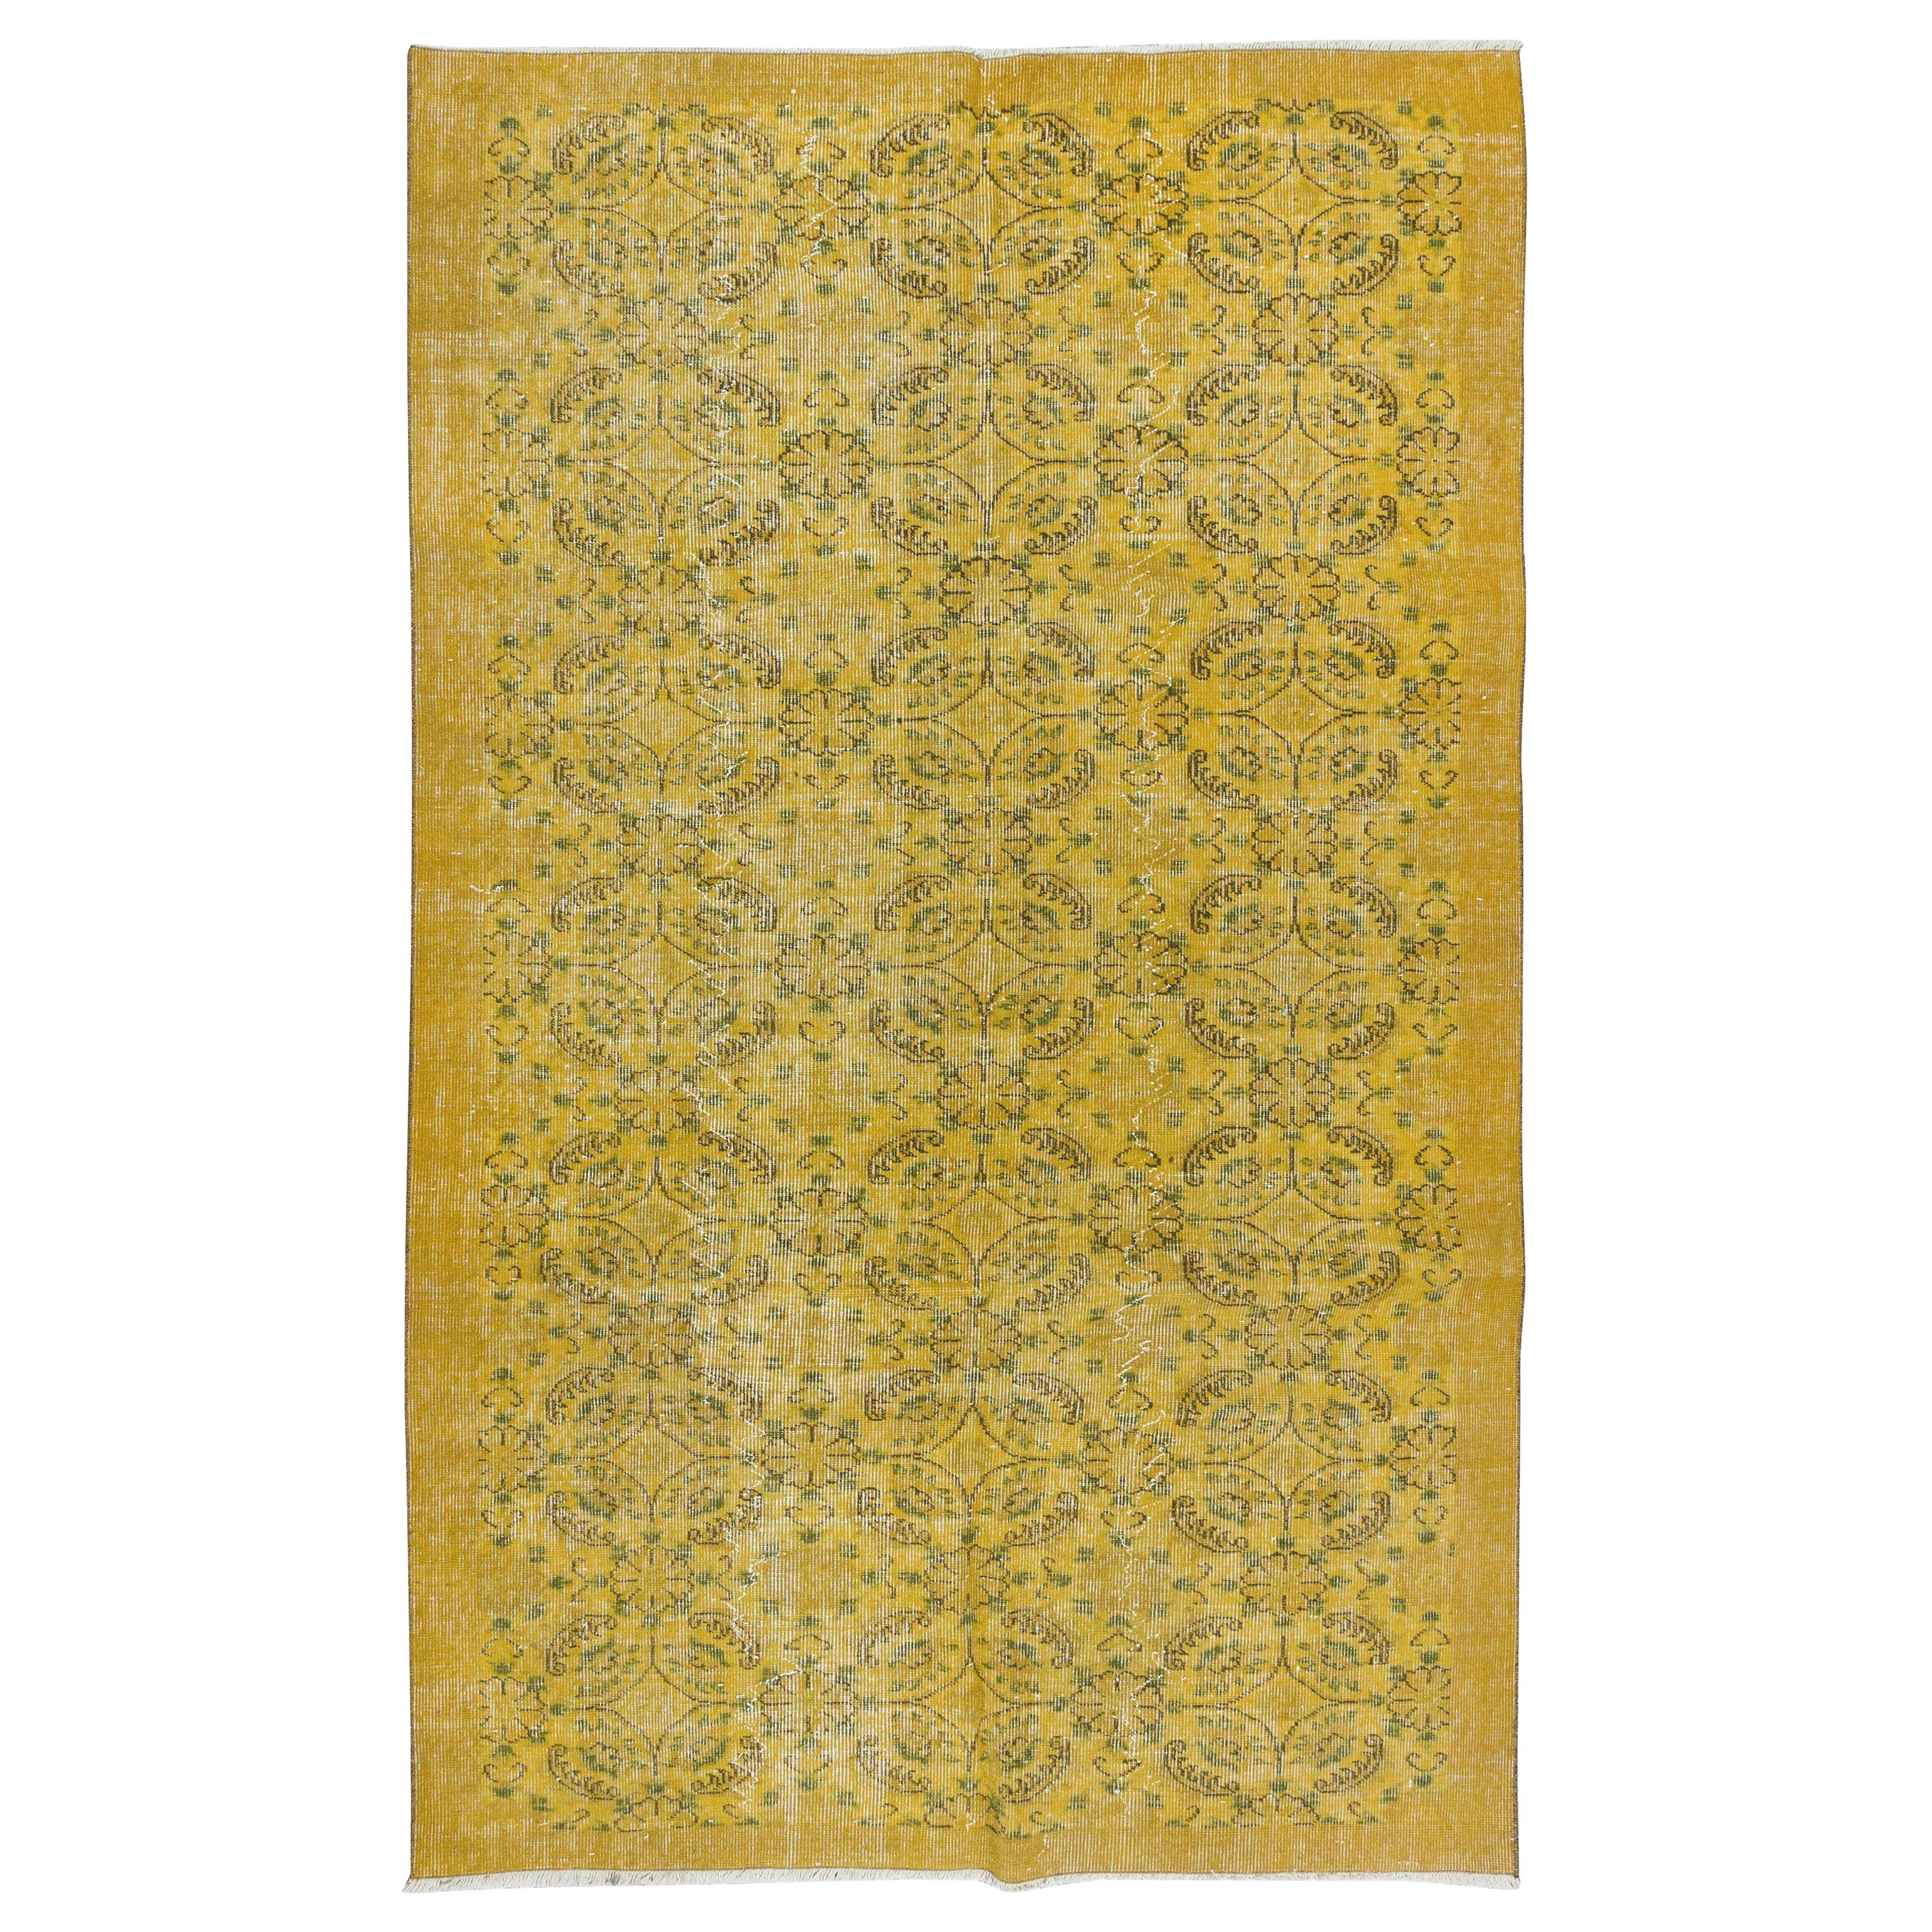 5.3x8.5 Ft Handmade Turkish Area Rug in Yellow, Great for Modern Interiors